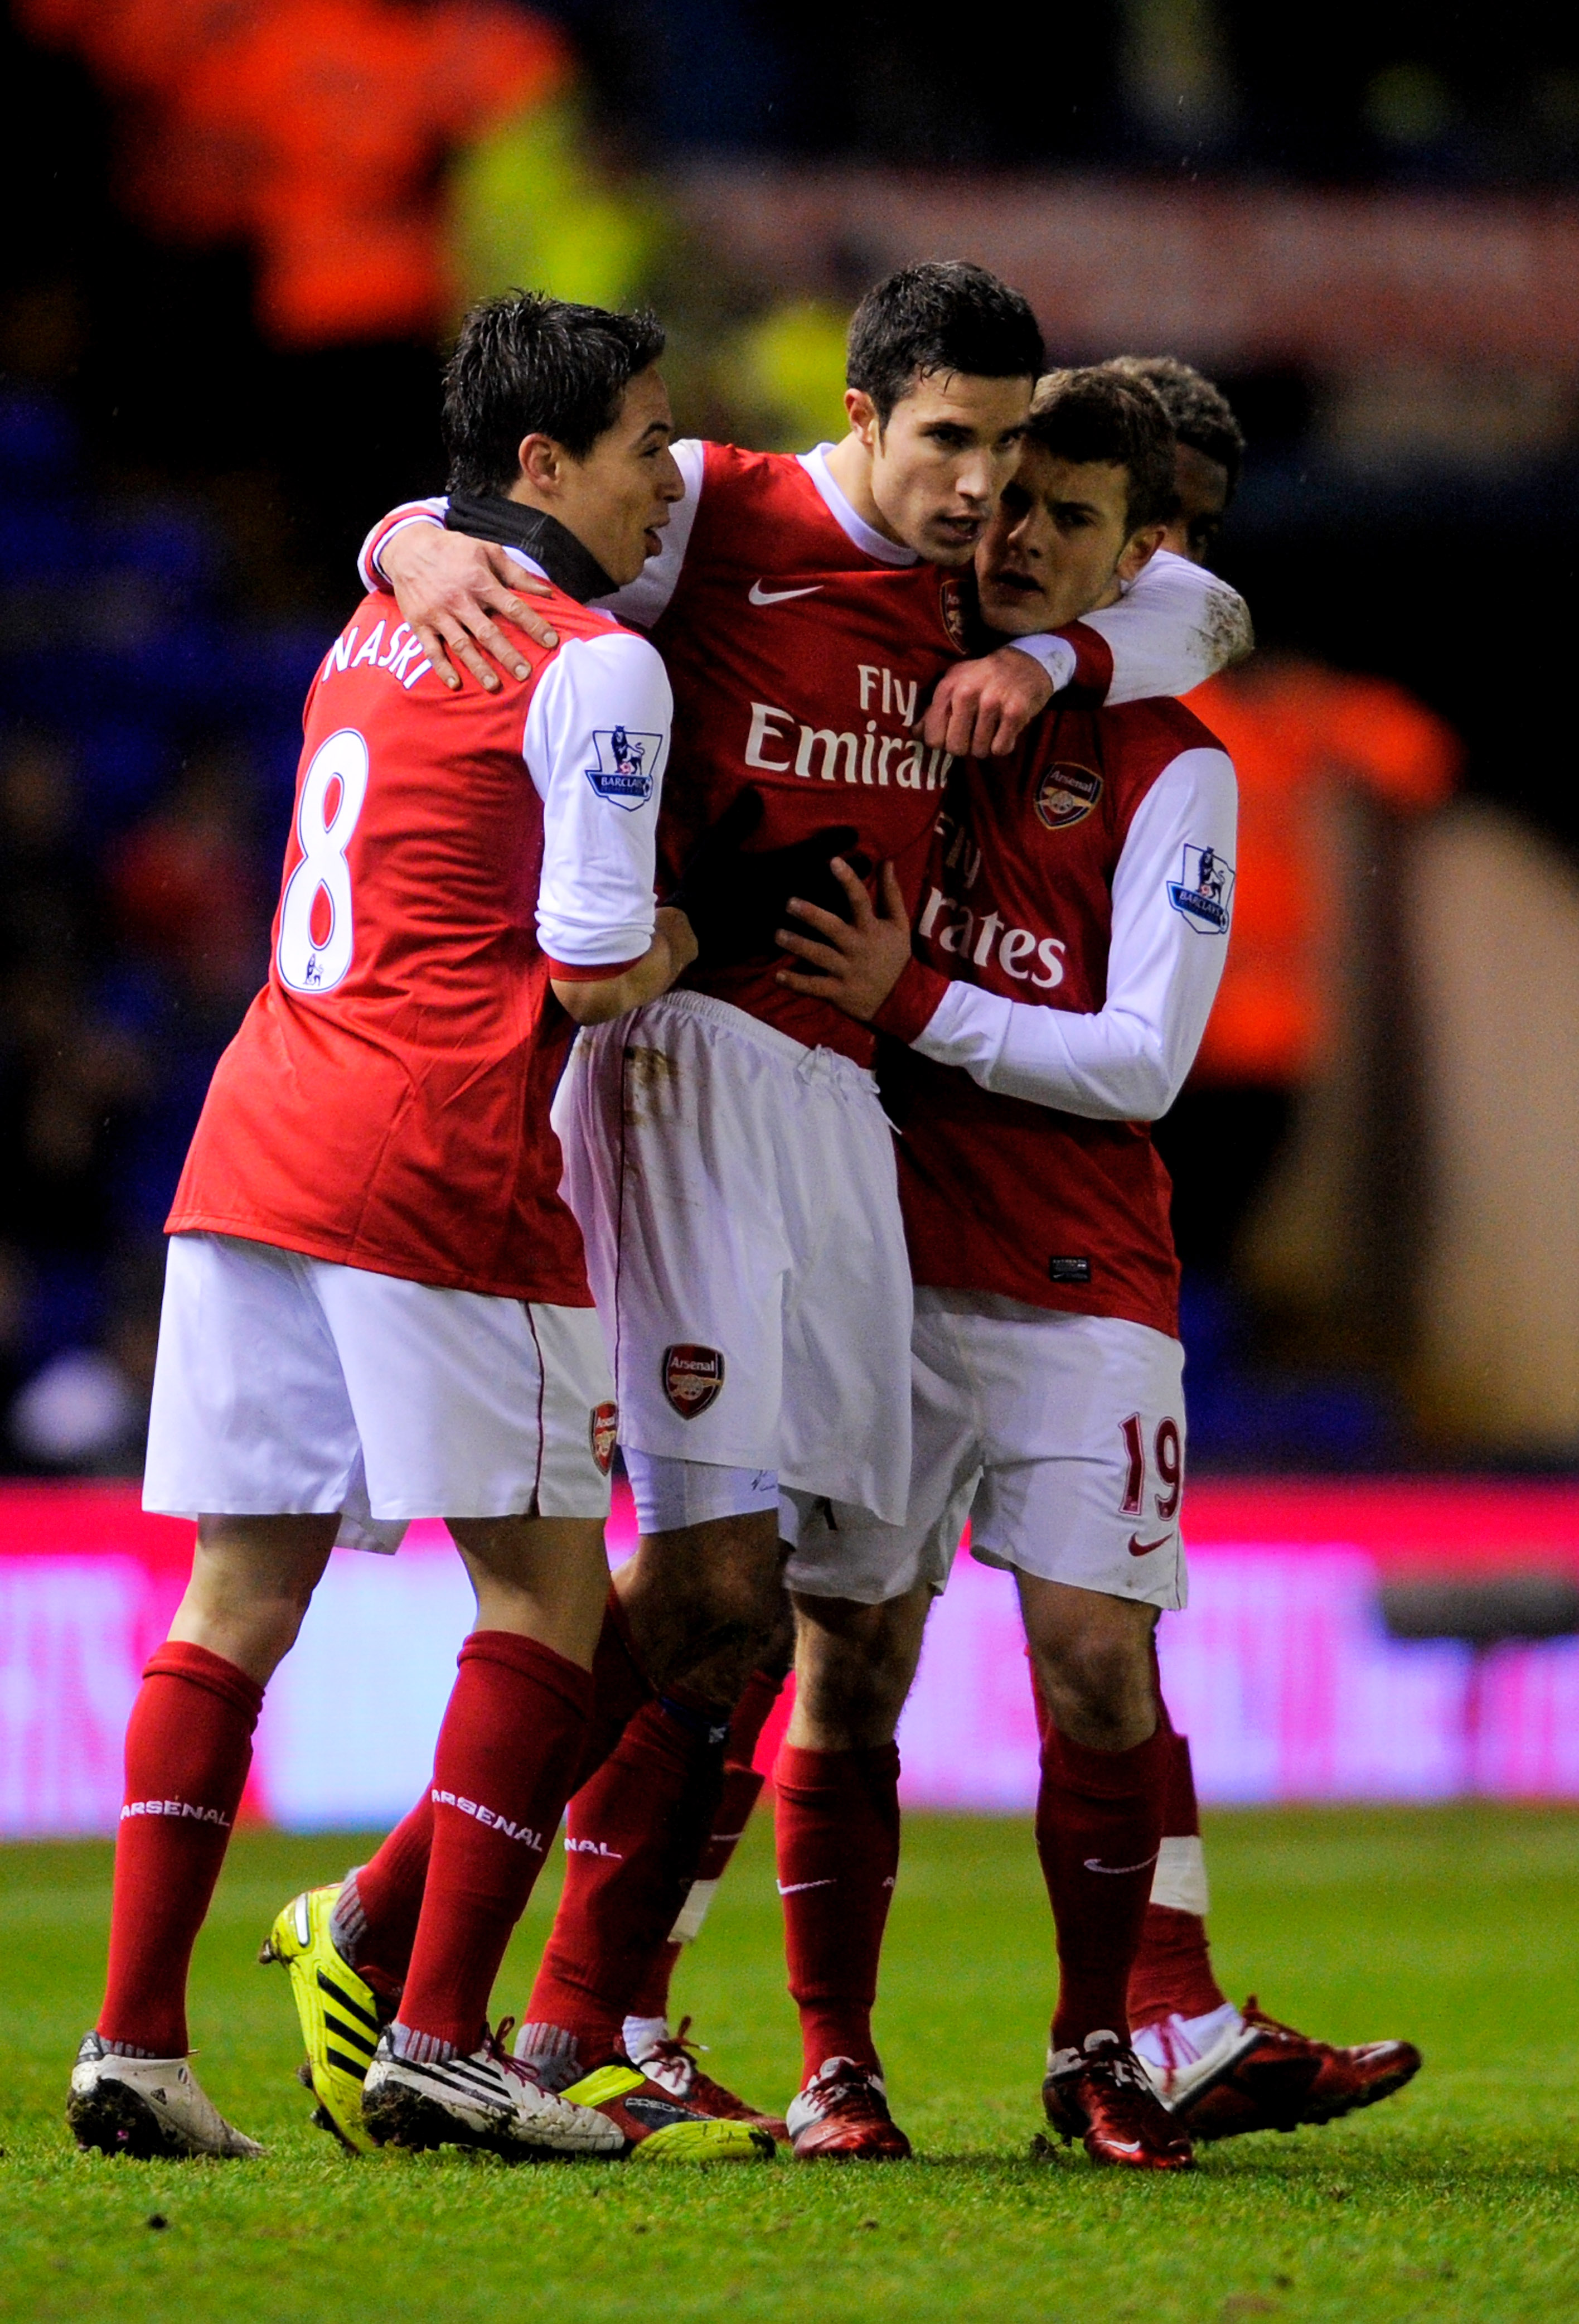 BIRMINGHAM, ENGLAND - JANUARY 01:  Robin Van Persie (C) of Arsenal is congratulated by teammates Samir Nasri (L) and Jack Wilshere (R) after scoring the opening goal of the match during the Barclays Premier Leaue match between Birmingham City and Arsenal